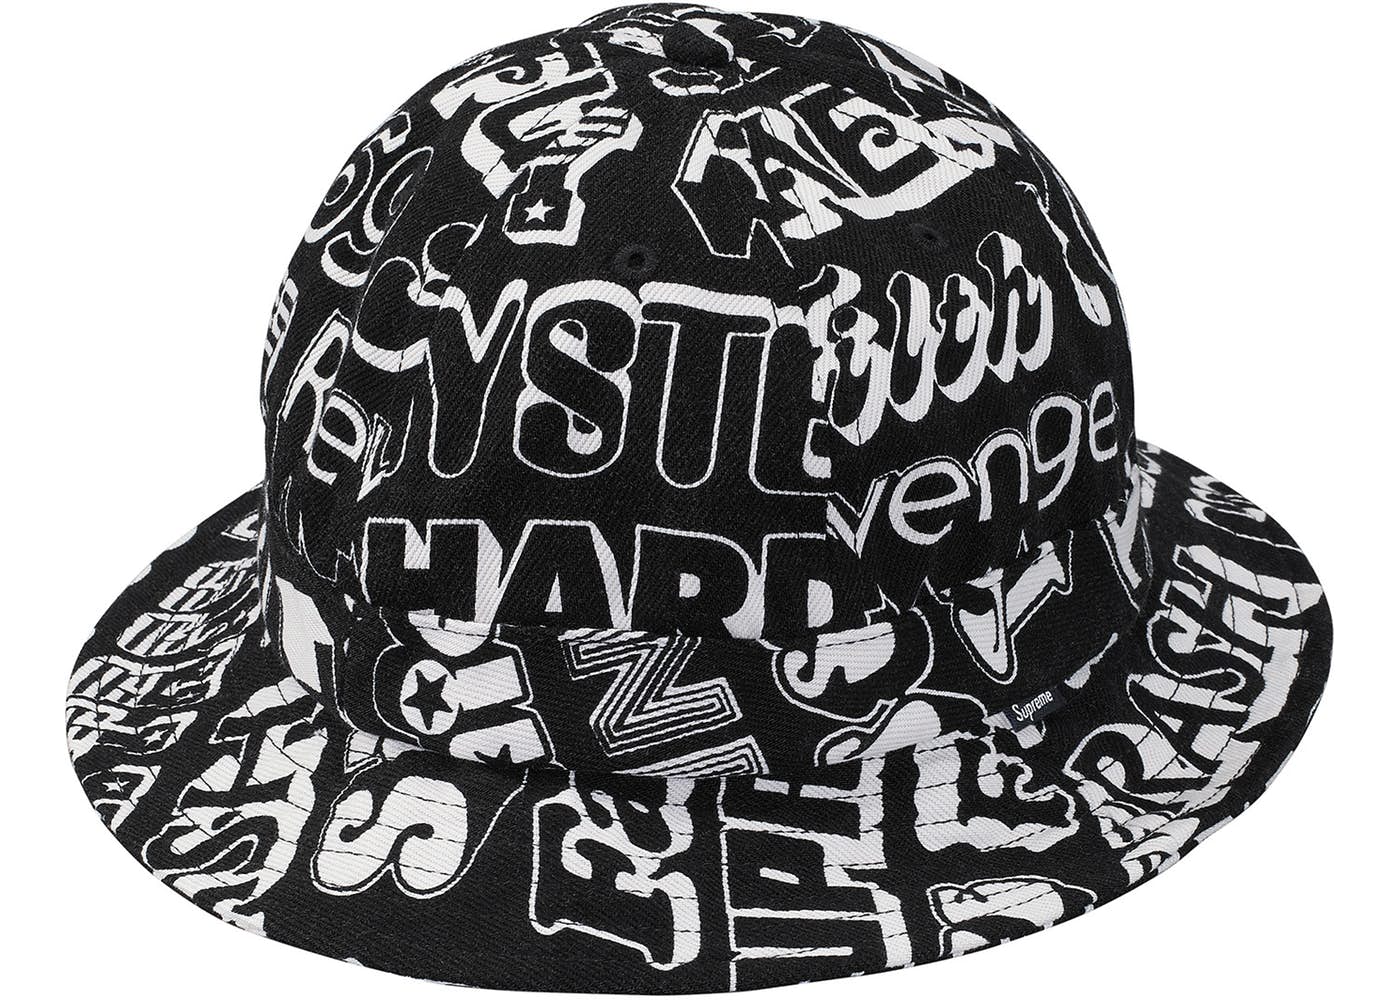 Supreme Hysteric Glamour Text Bell Hat Black Fall/Winter 2017